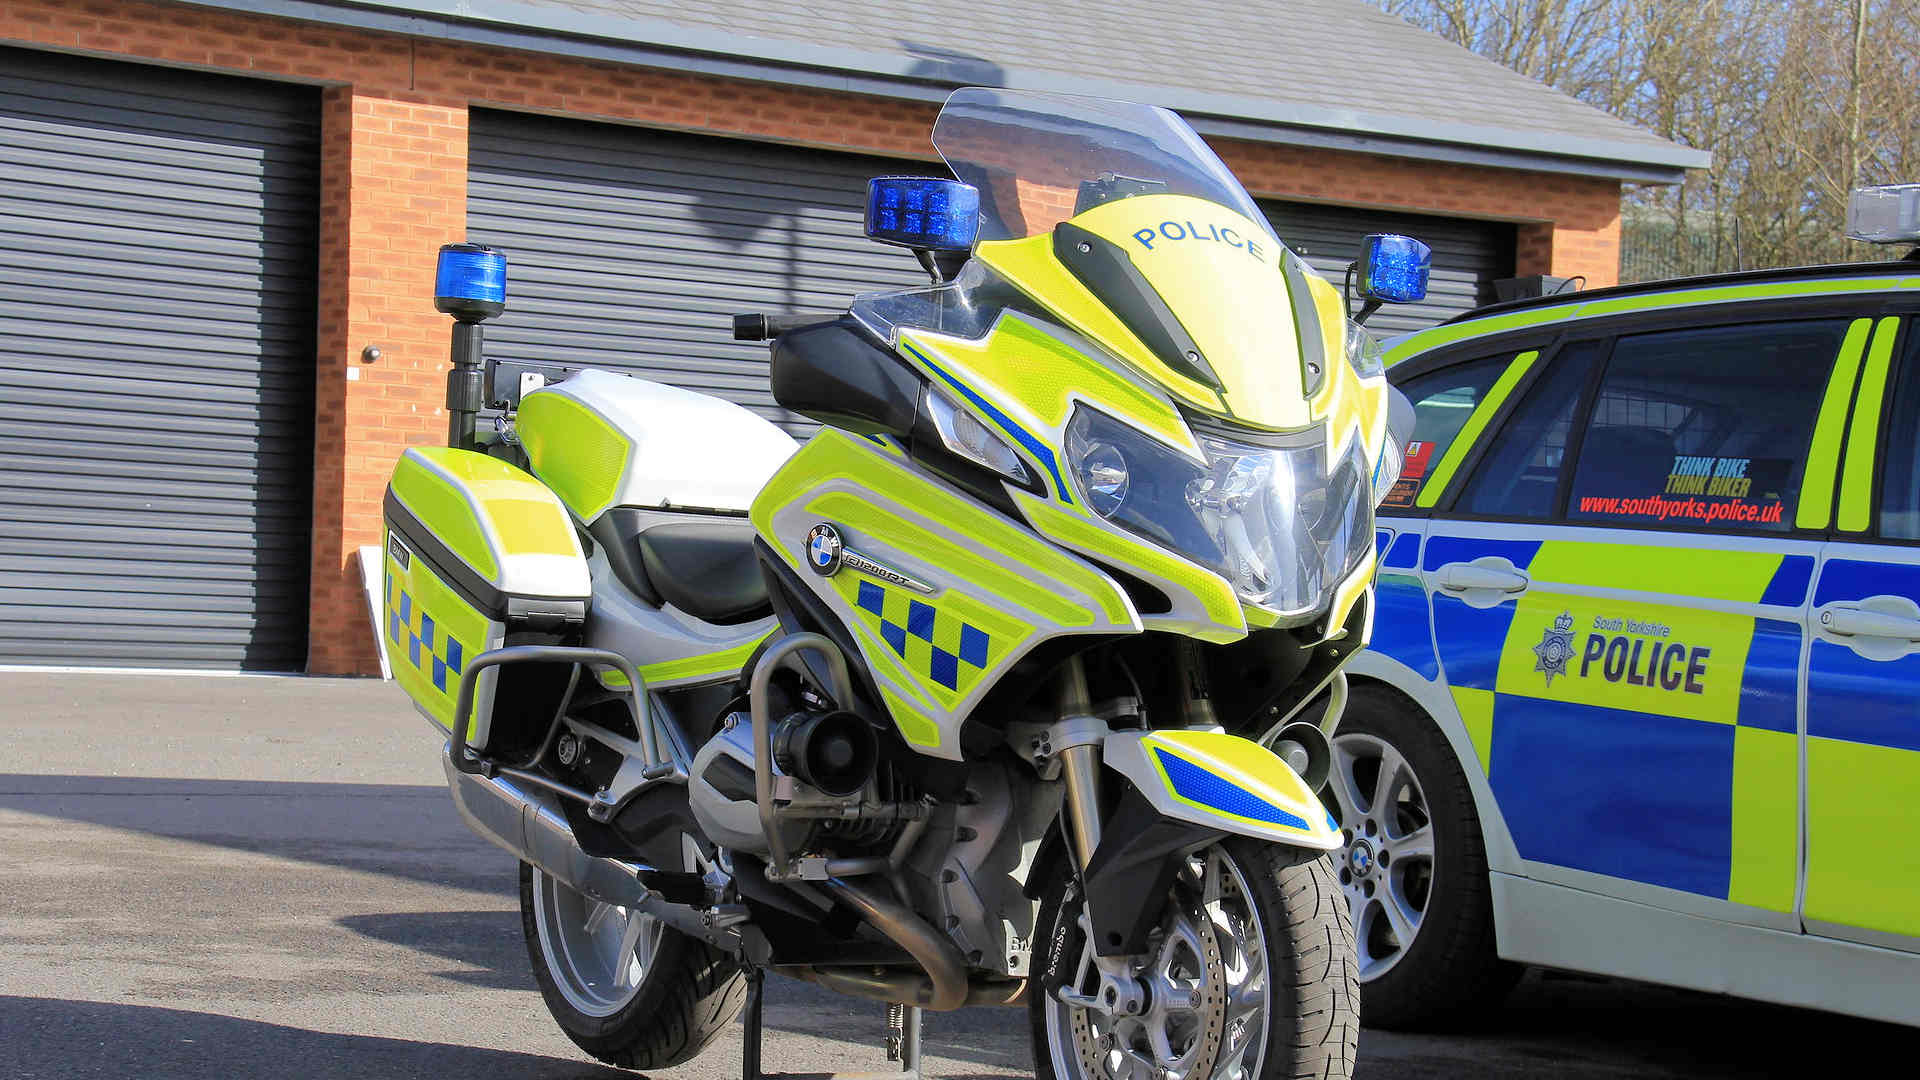 South Yorkshire Police motorcycle